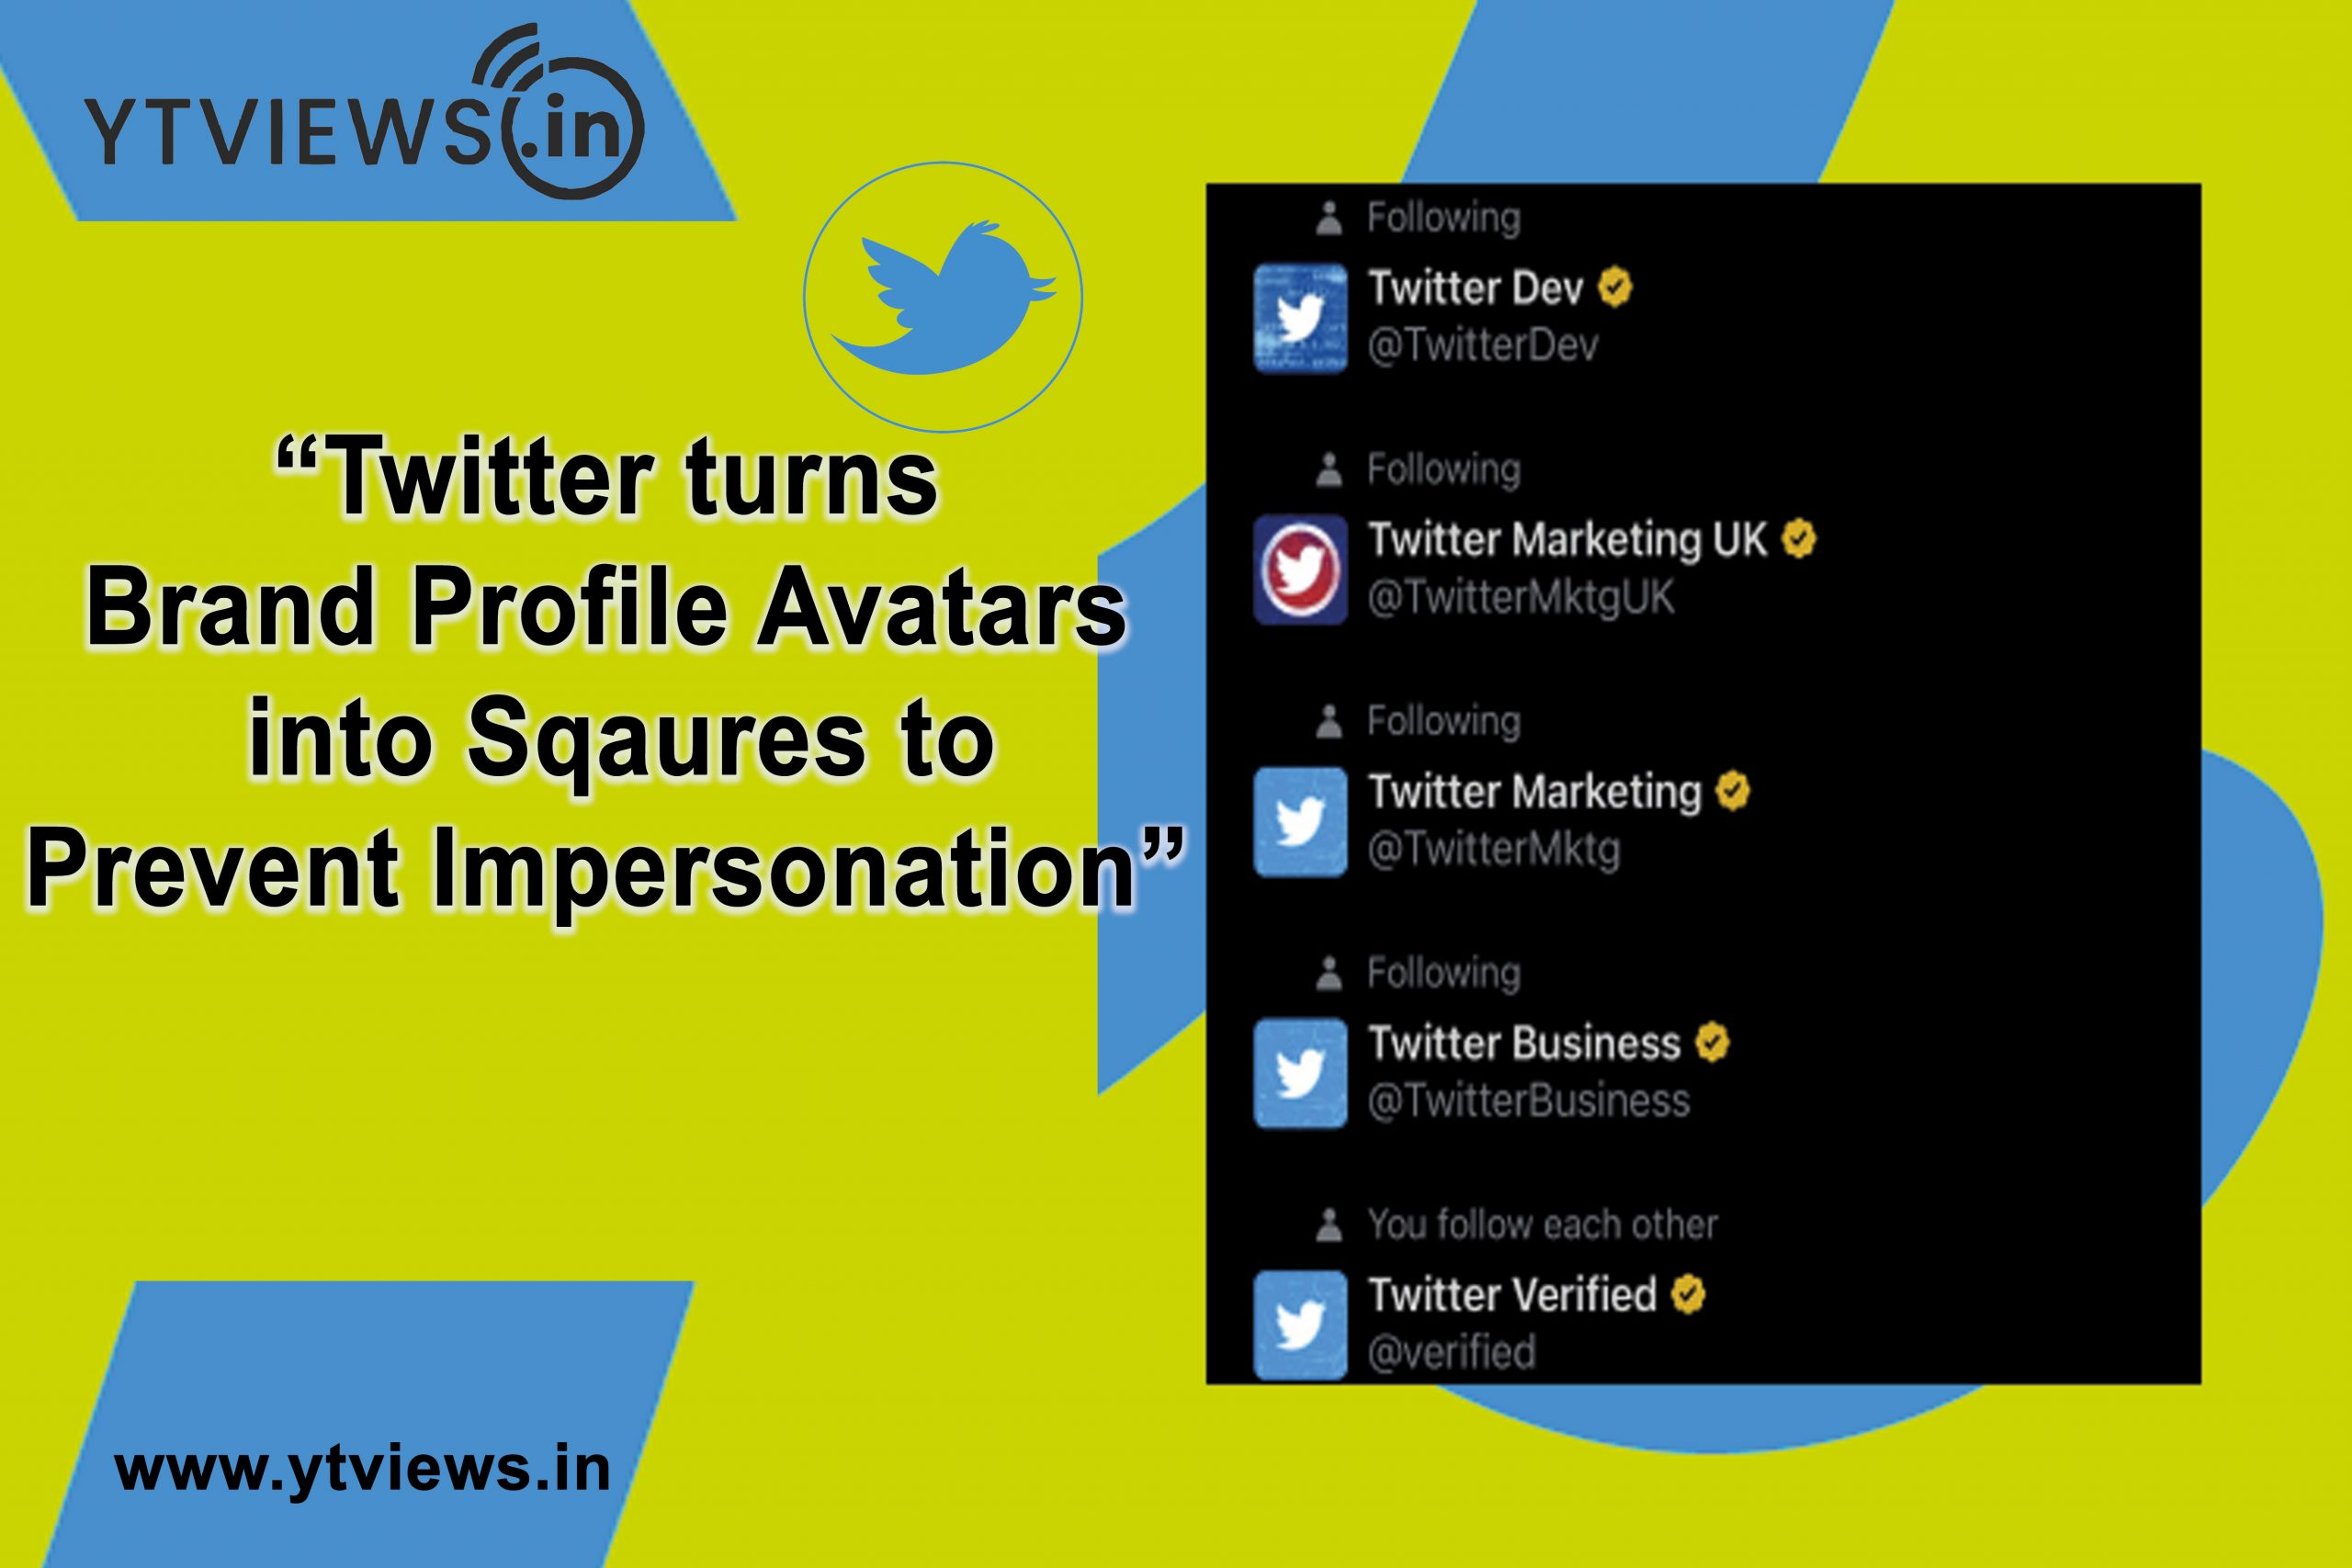 Twitter turns Brand Profile Avatars into squares to prevent Impersonation